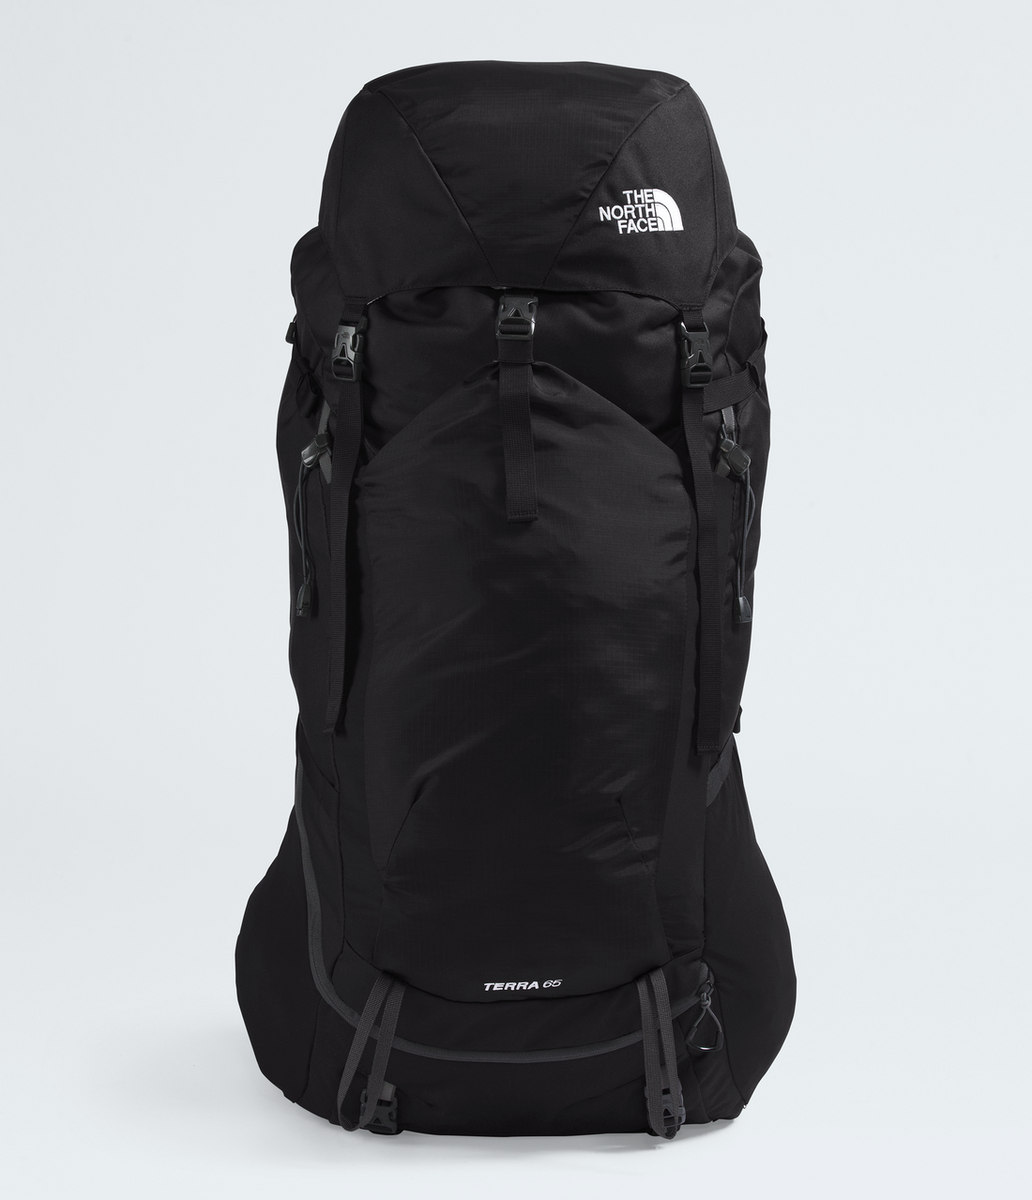 The North Face Terra 65 Backpack | Alpine Country Lodge | St